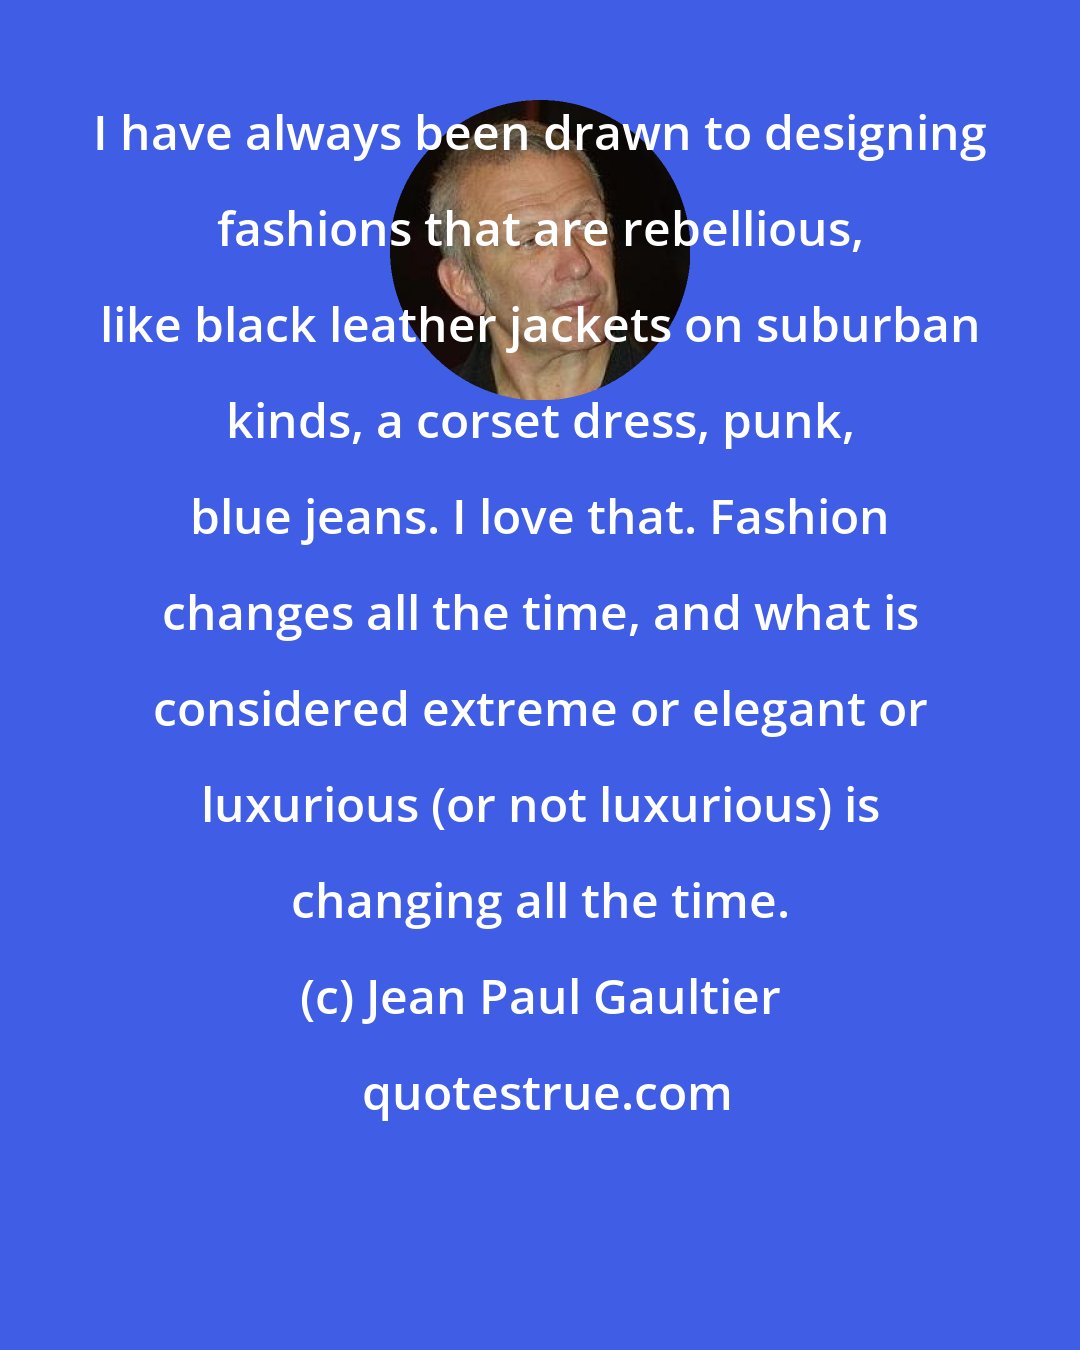 Jean Paul Gaultier: I have always been drawn to designing fashions that are rebellious, like black leather jackets on suburban kinds, a corset dress, punk, blue jeans. I love that. Fashion changes all the time, and what is considered extreme or elegant or luxurious (or not luxurious) is changing all the time.